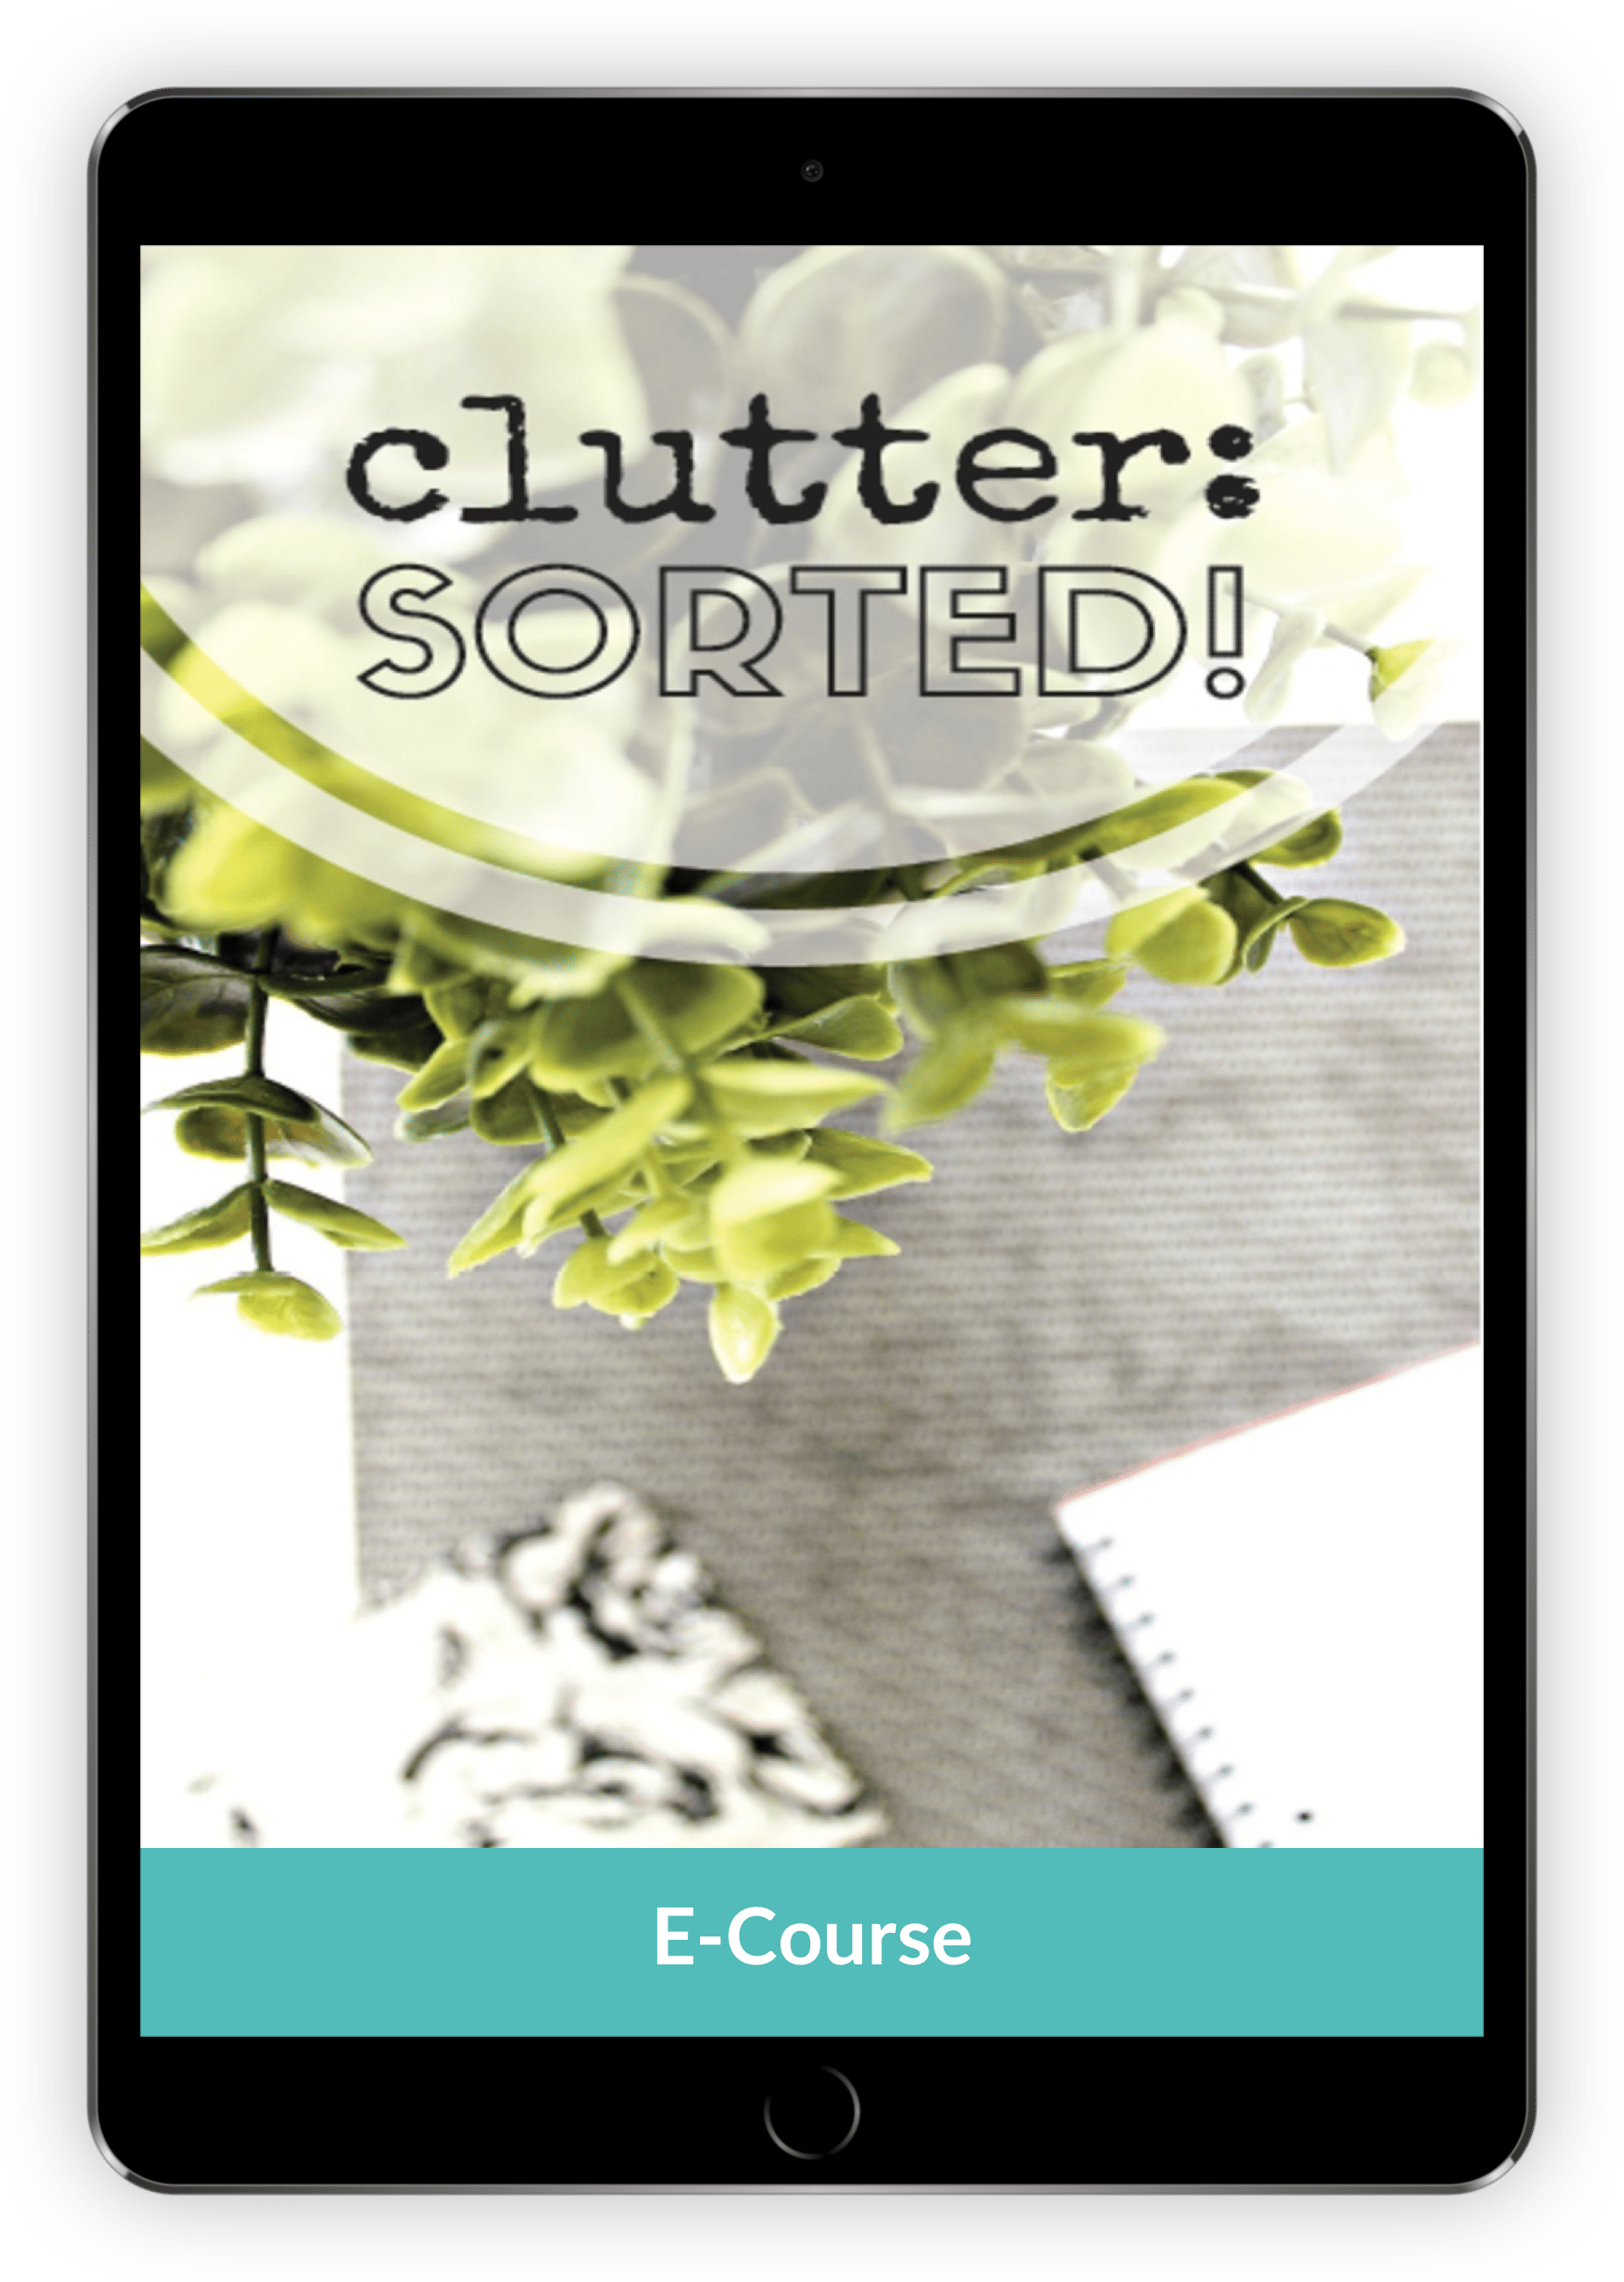 Four Great eCourses to Help You Live with Less Clutter and Less Stress